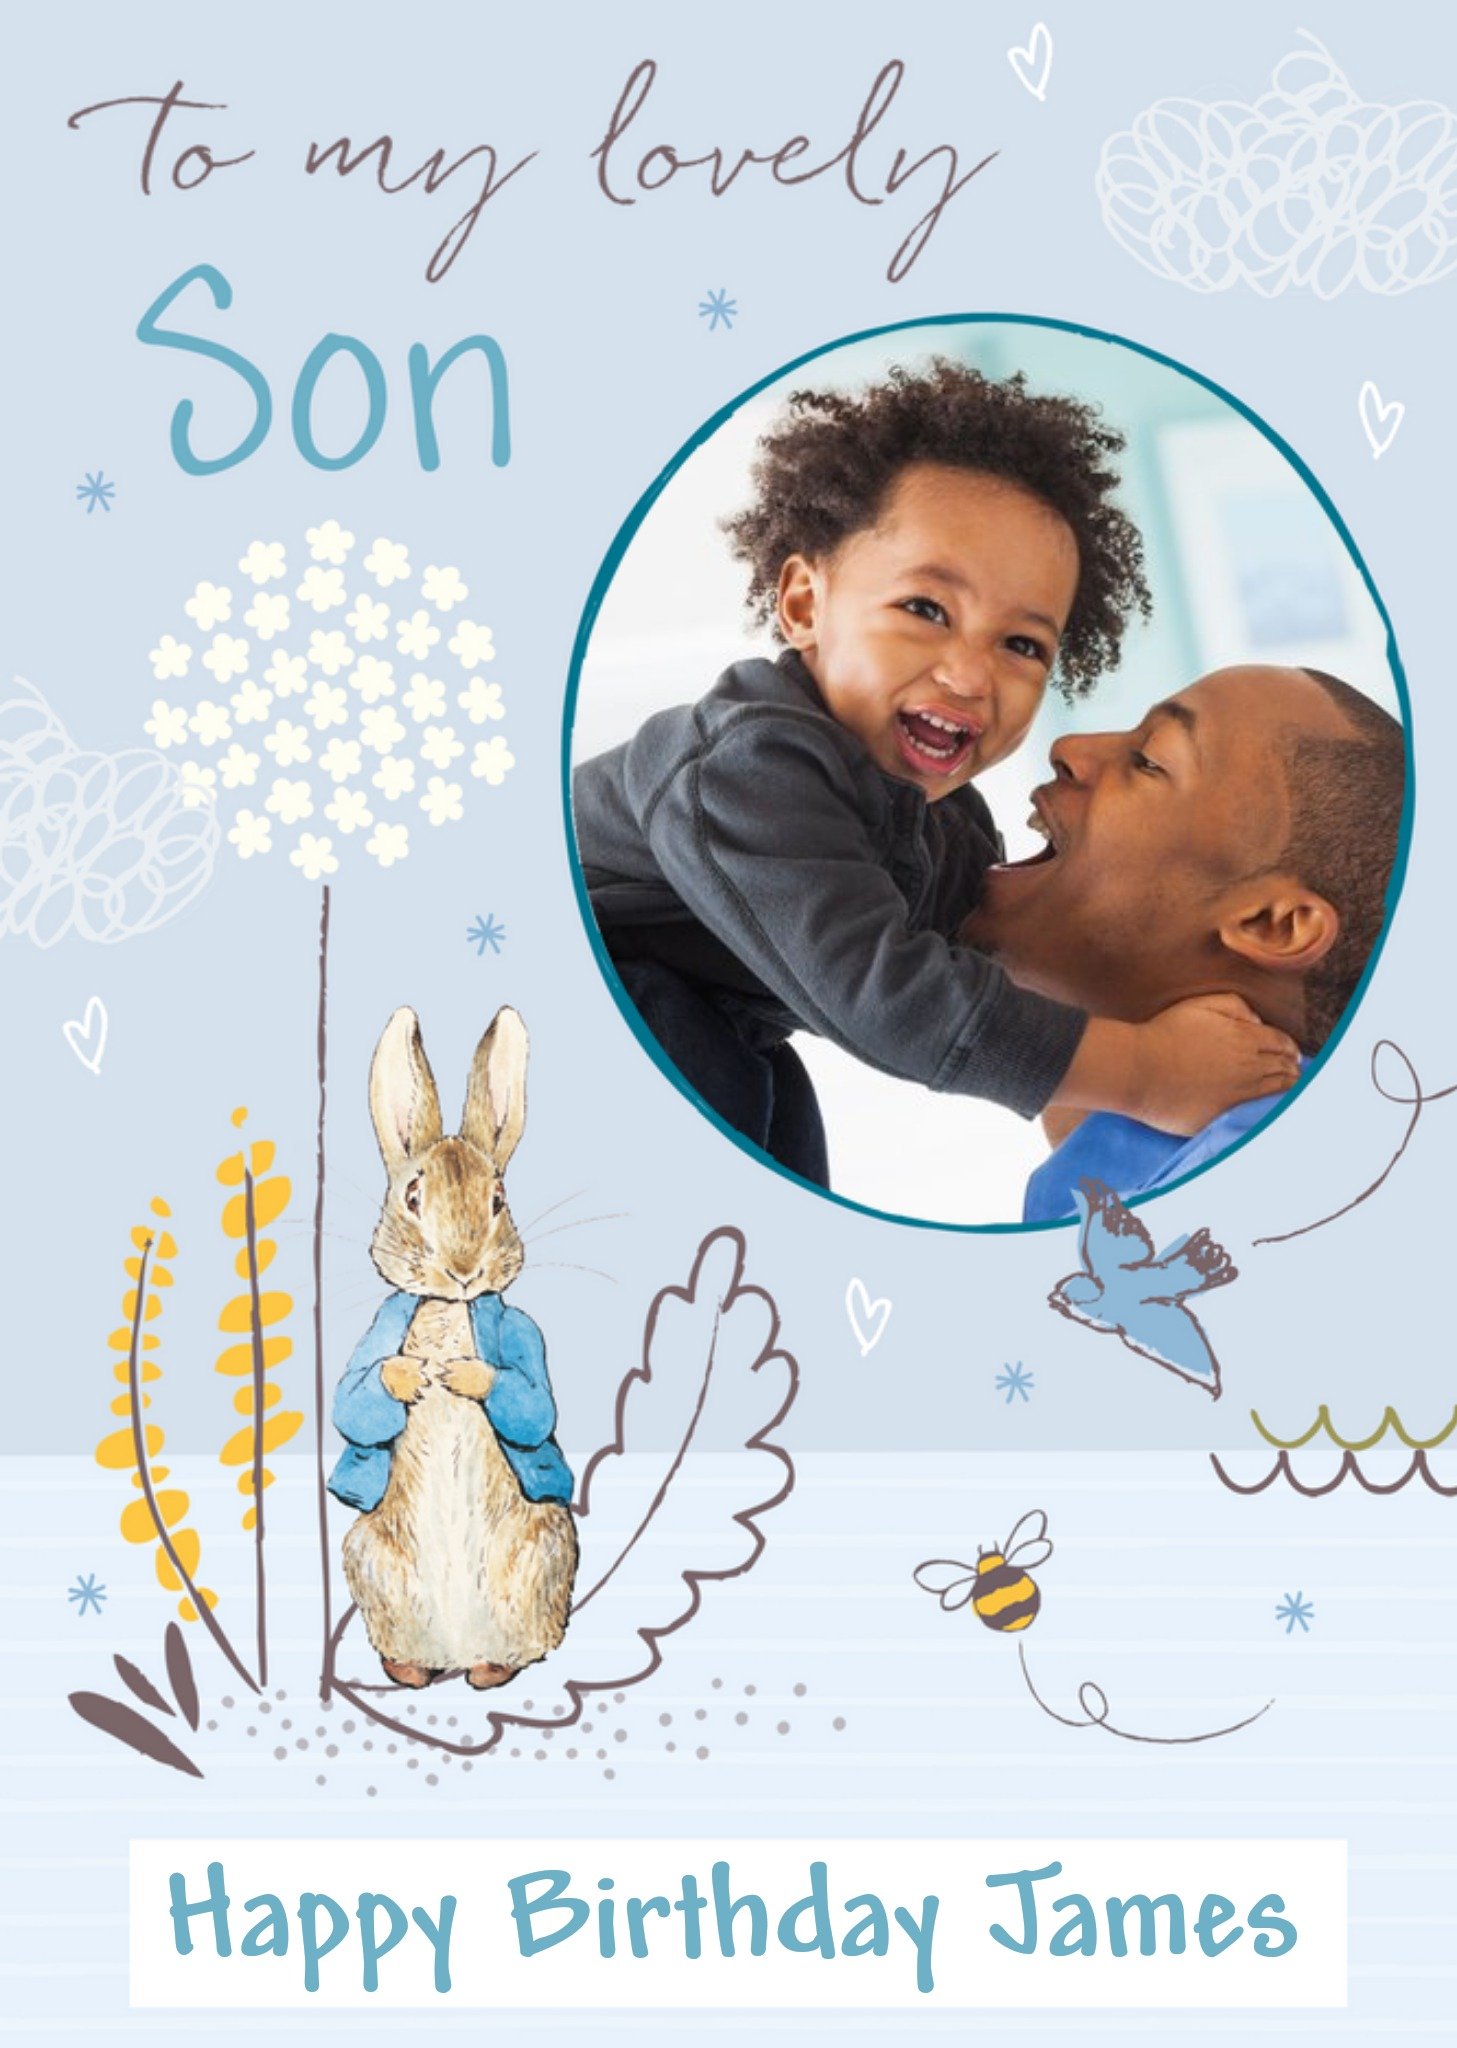 Peter Rabbit To My Lovely Son Photo Upload Birthday Card, Large